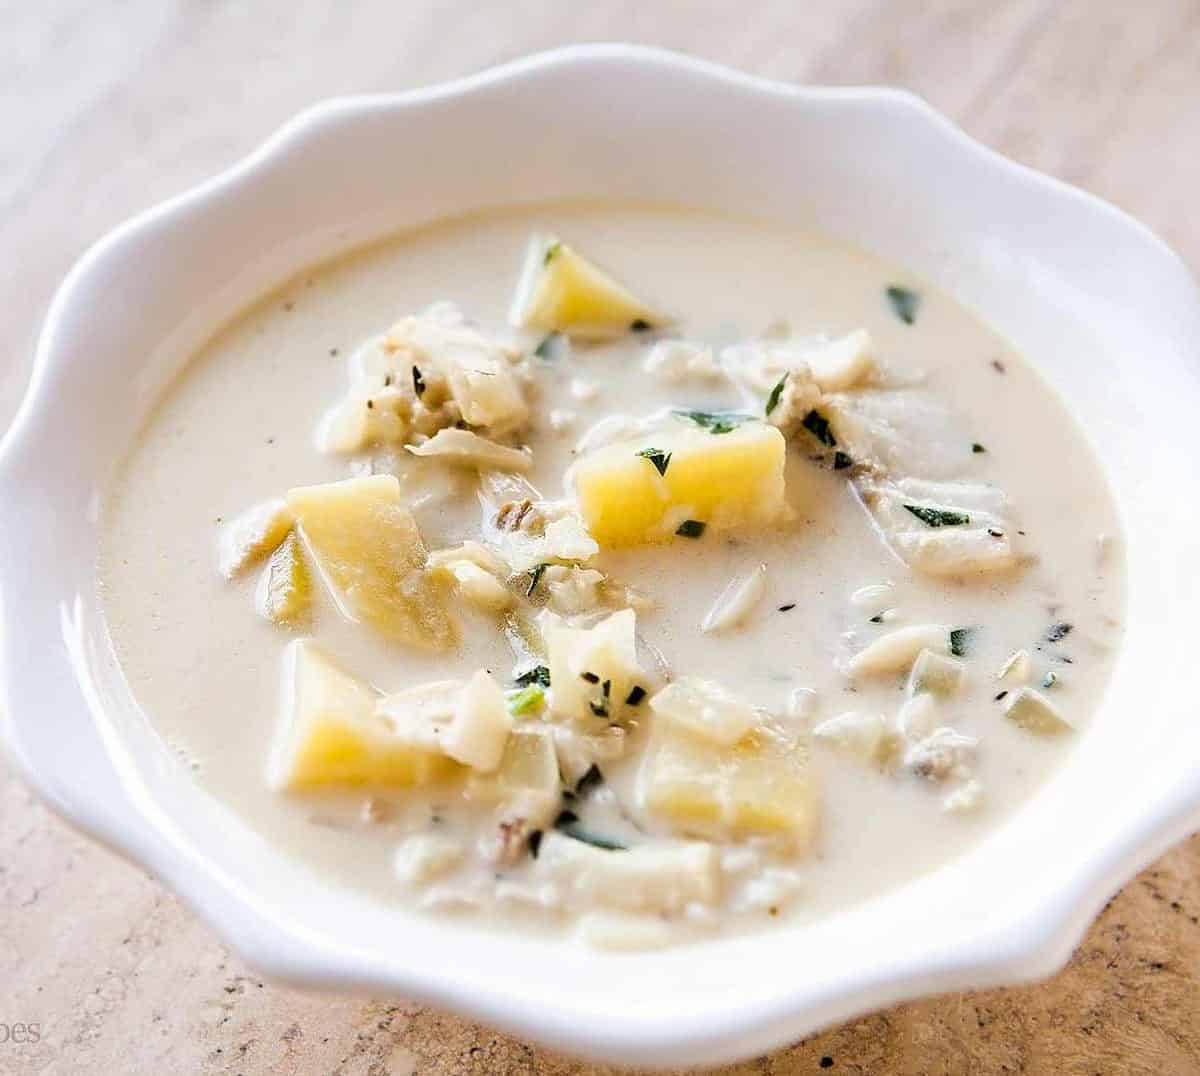 Delicious Fish Chowder Recipe for a Hearty Meal